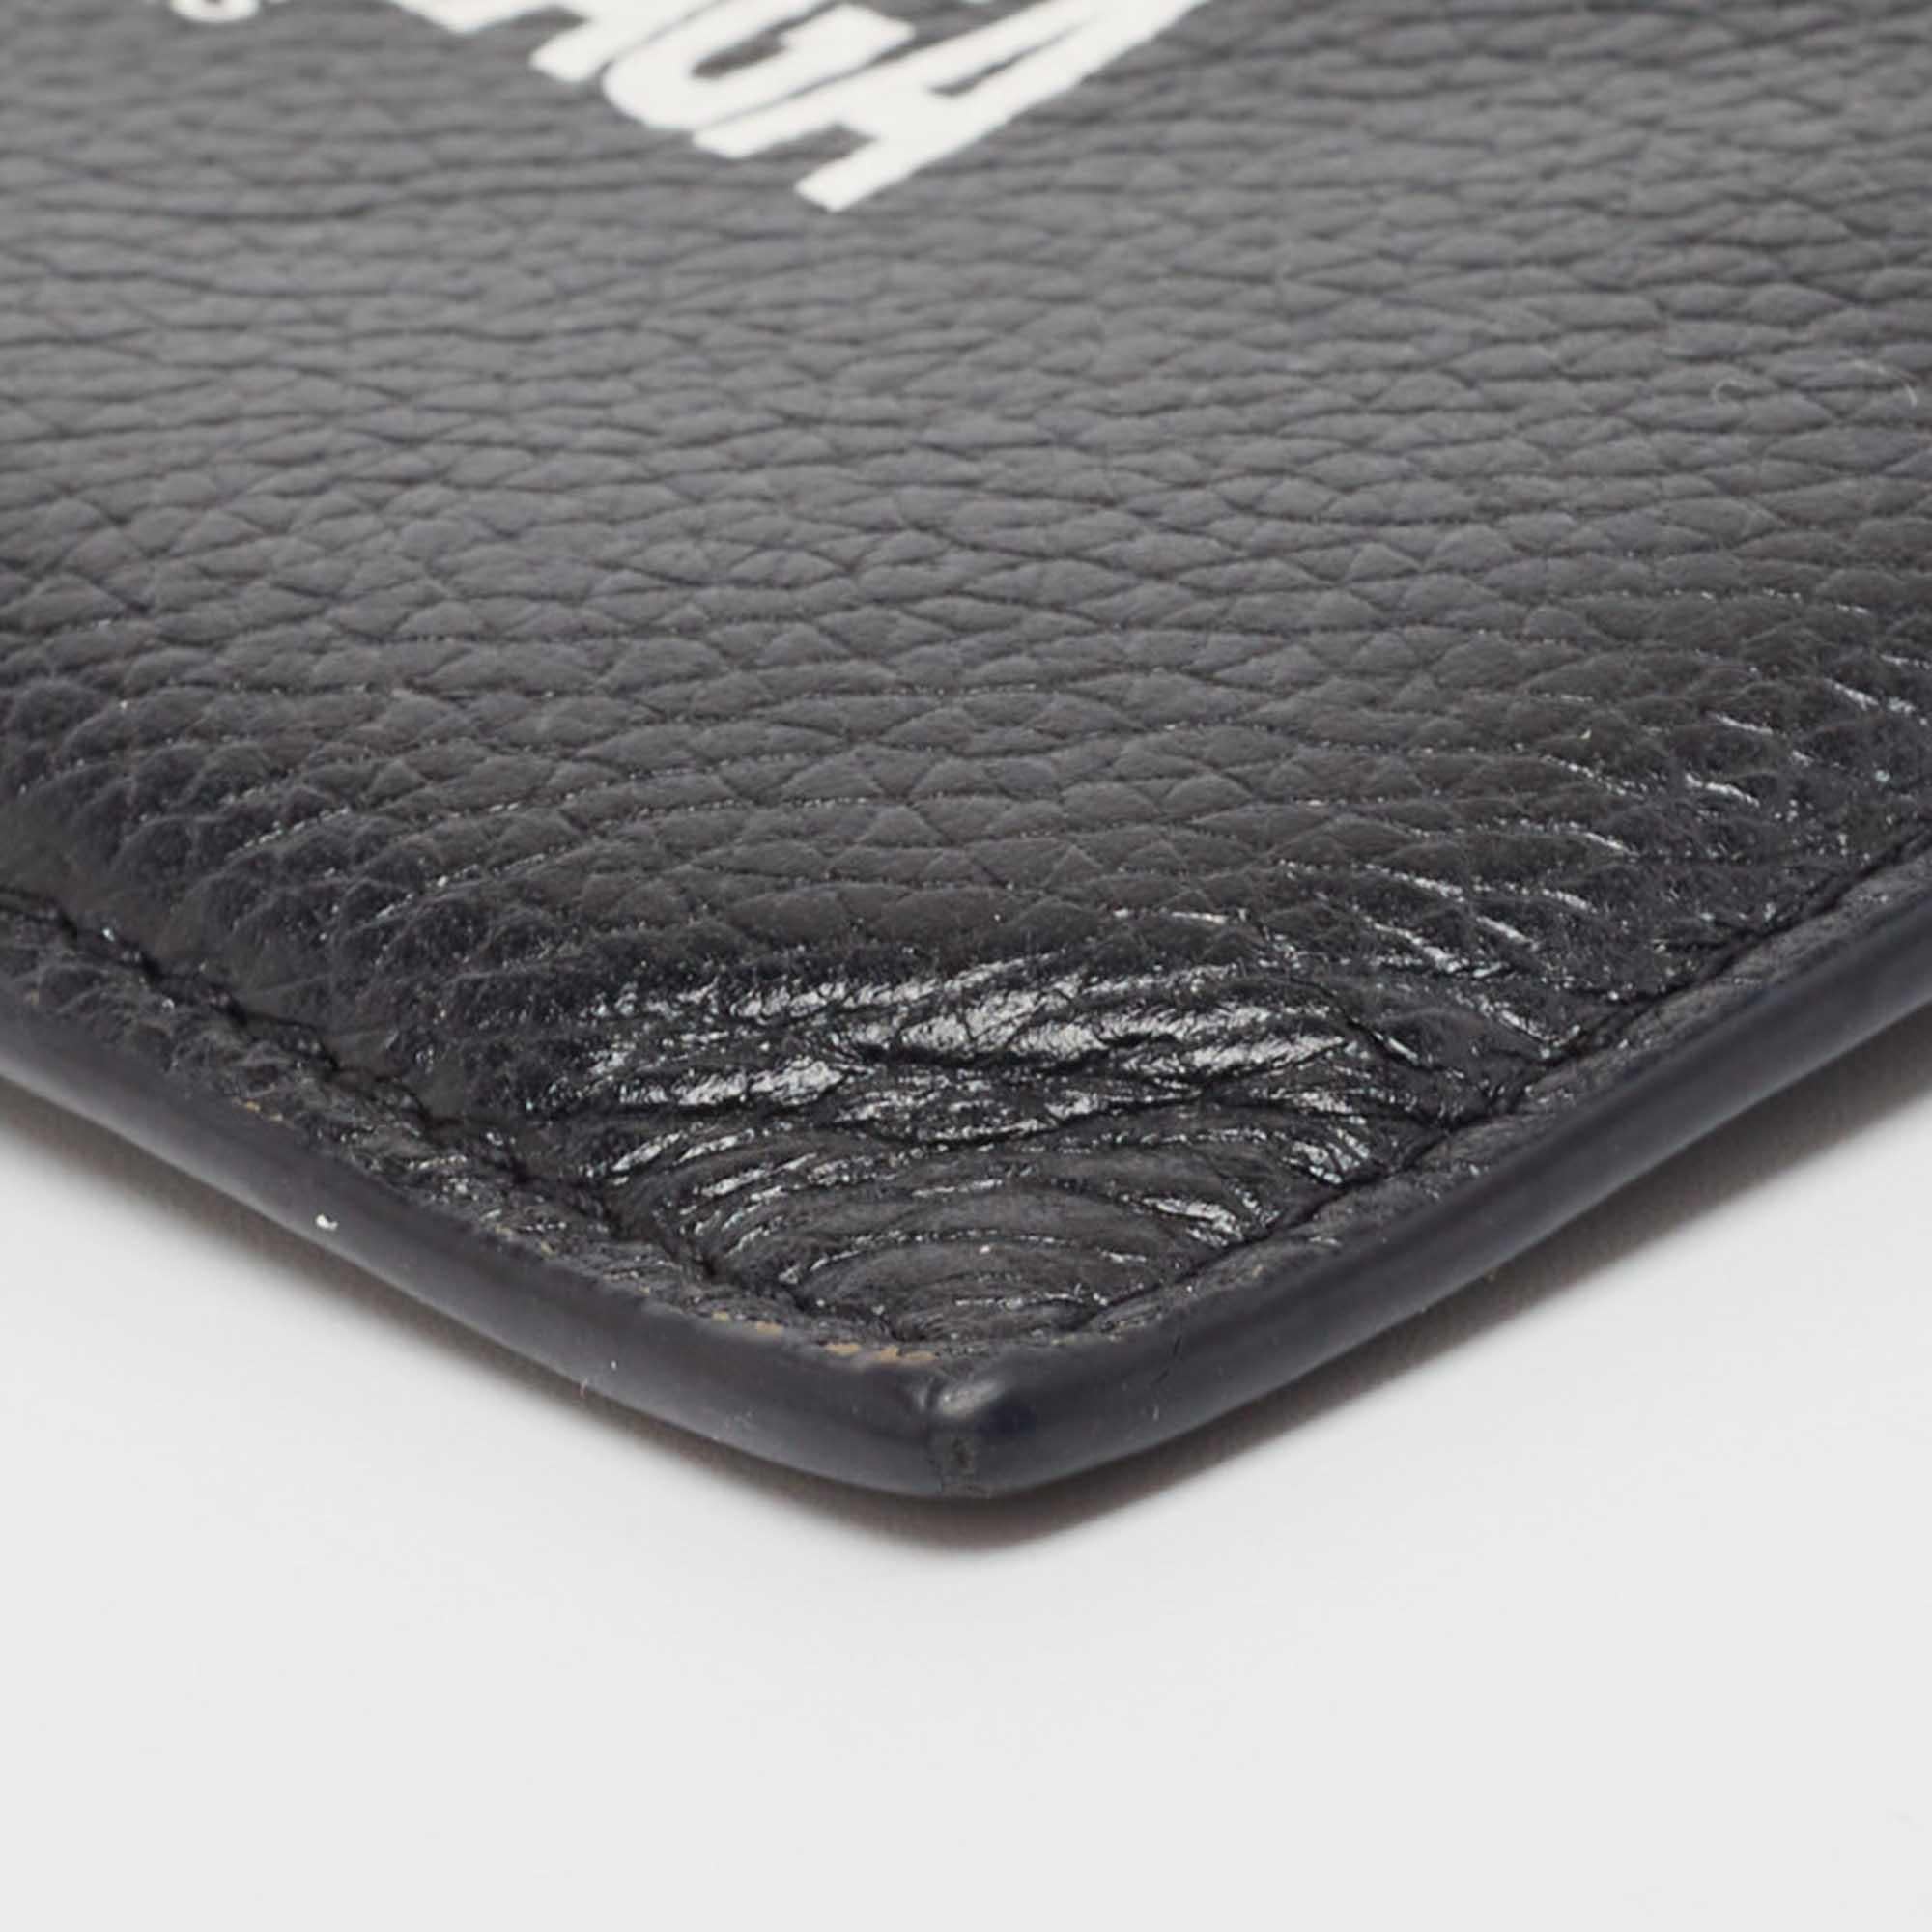 Designed by Balenciaga, this card case made from leather is the perfect accessory to keep your cards in proper order. It has a zip-enclosed interior and a front brand logo.

